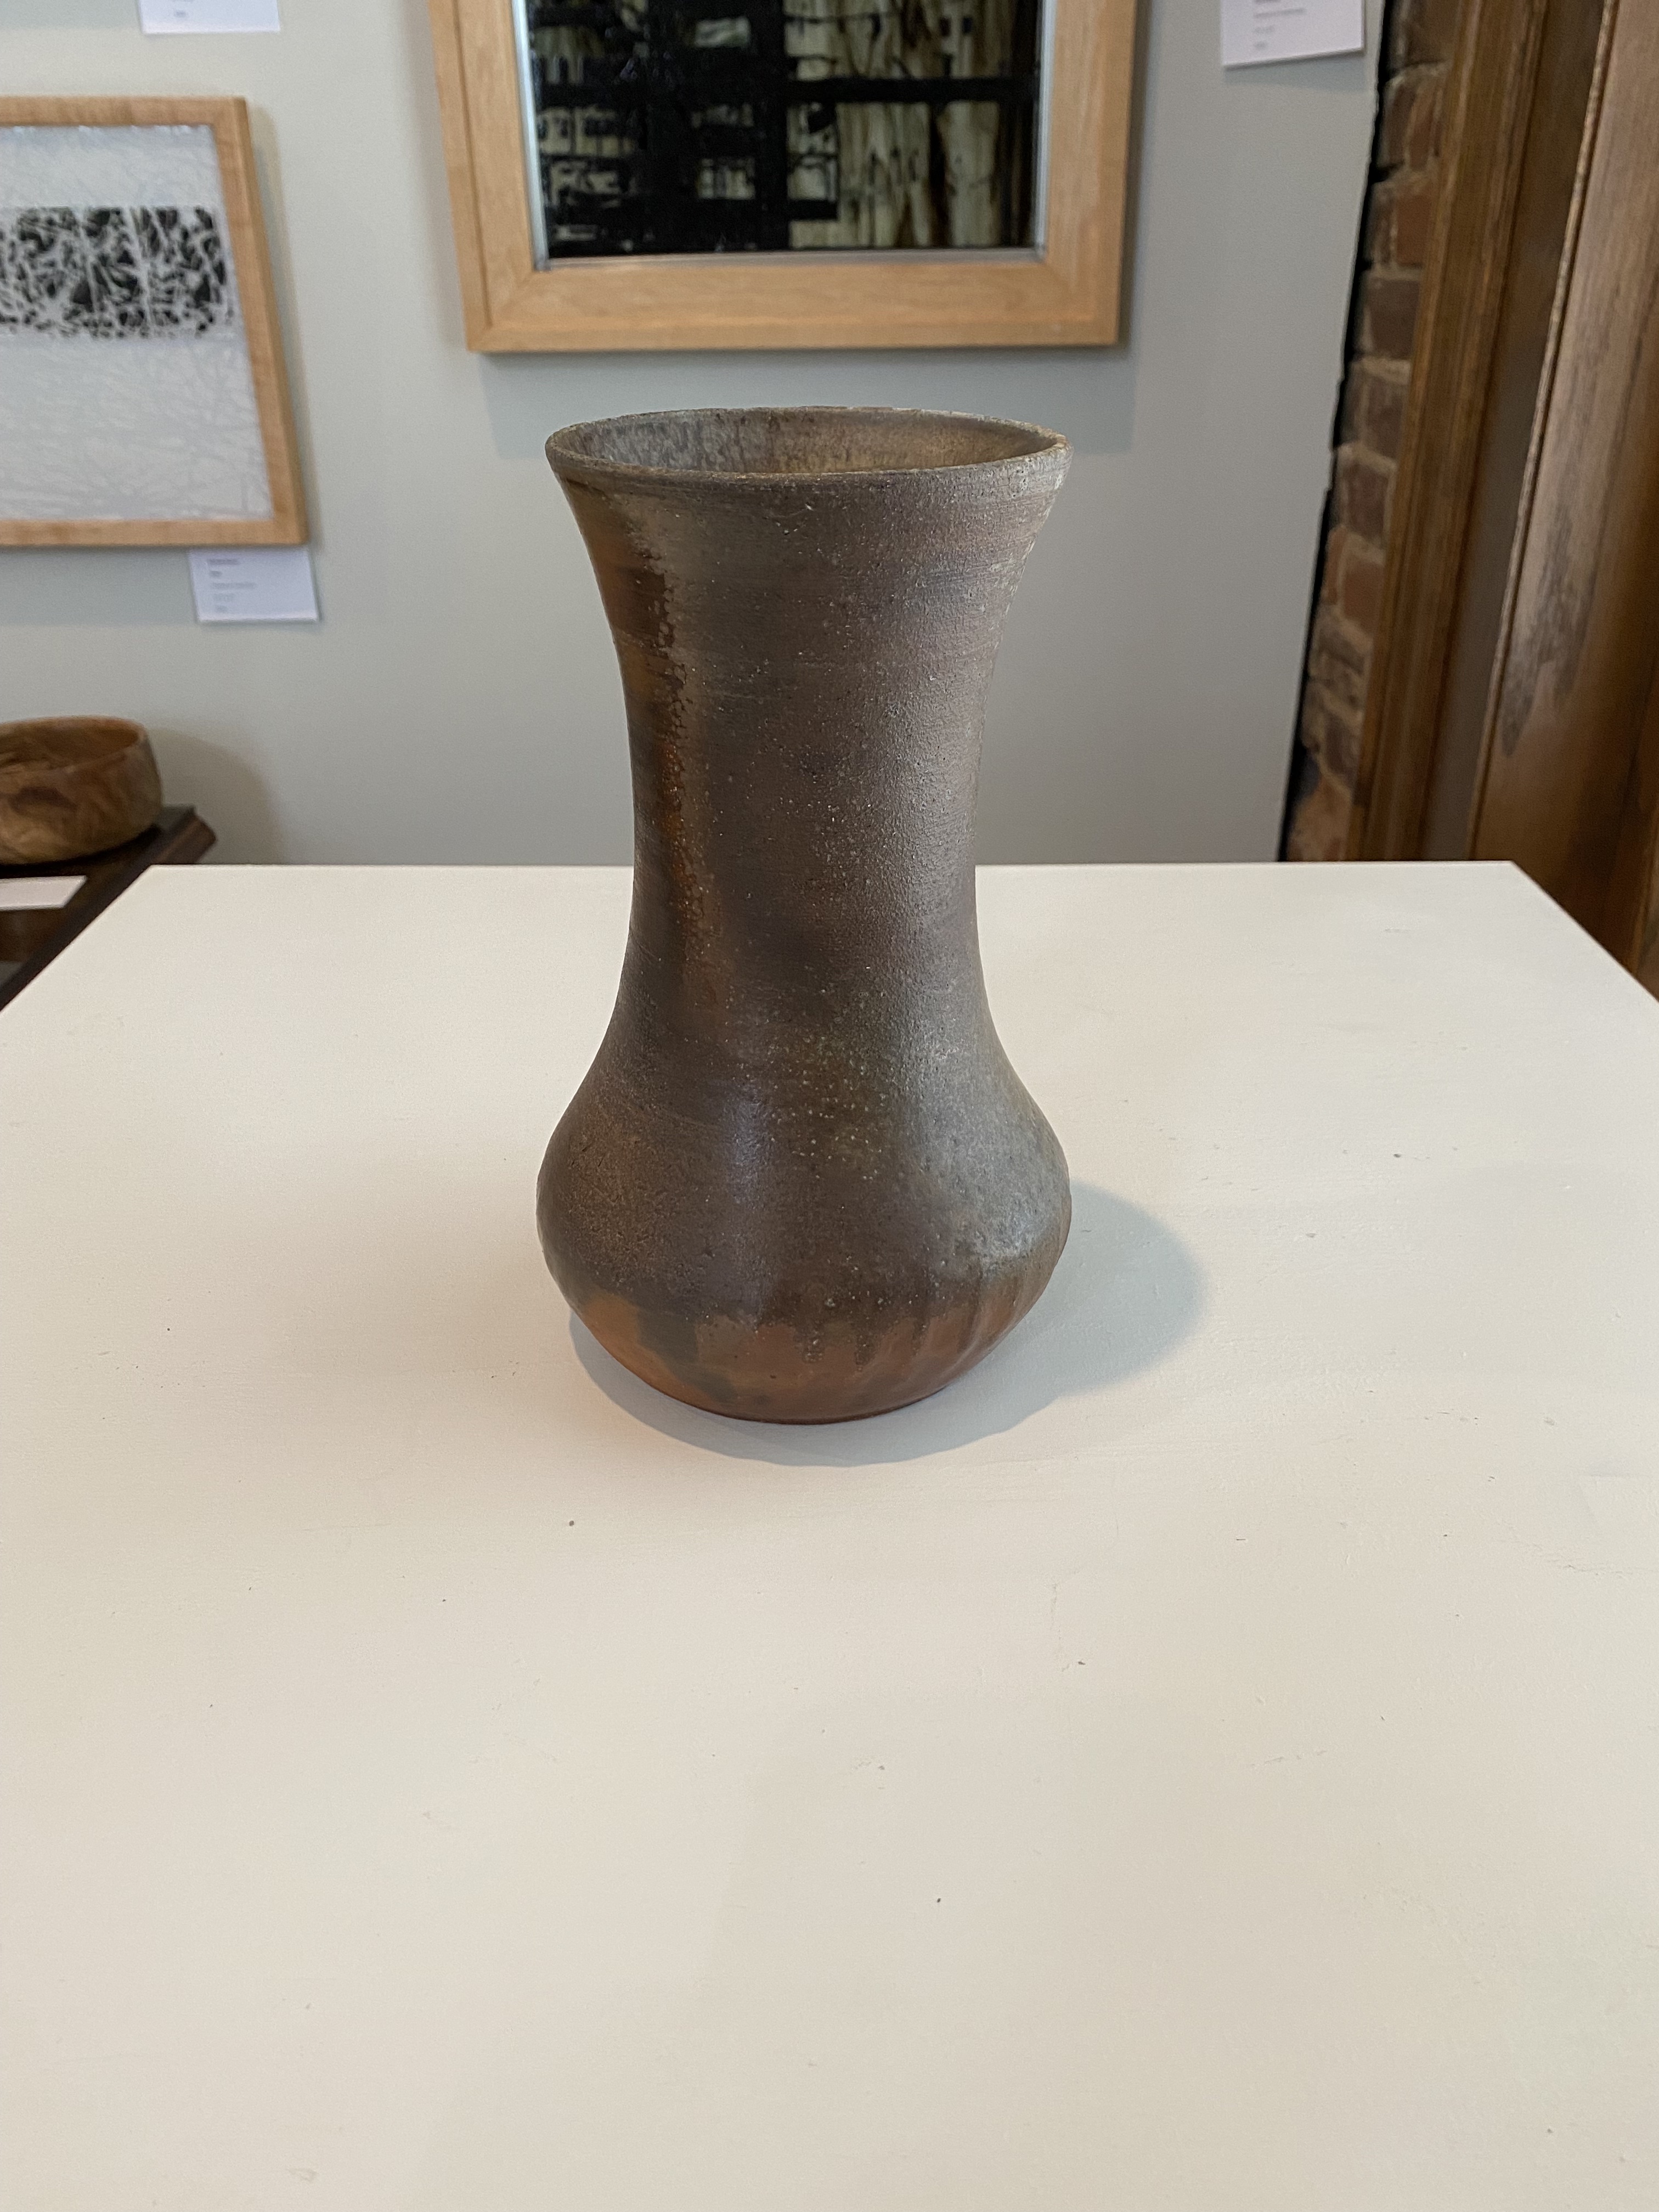 Vase
Raw Wood-Fired
8 1/2"
$65.
